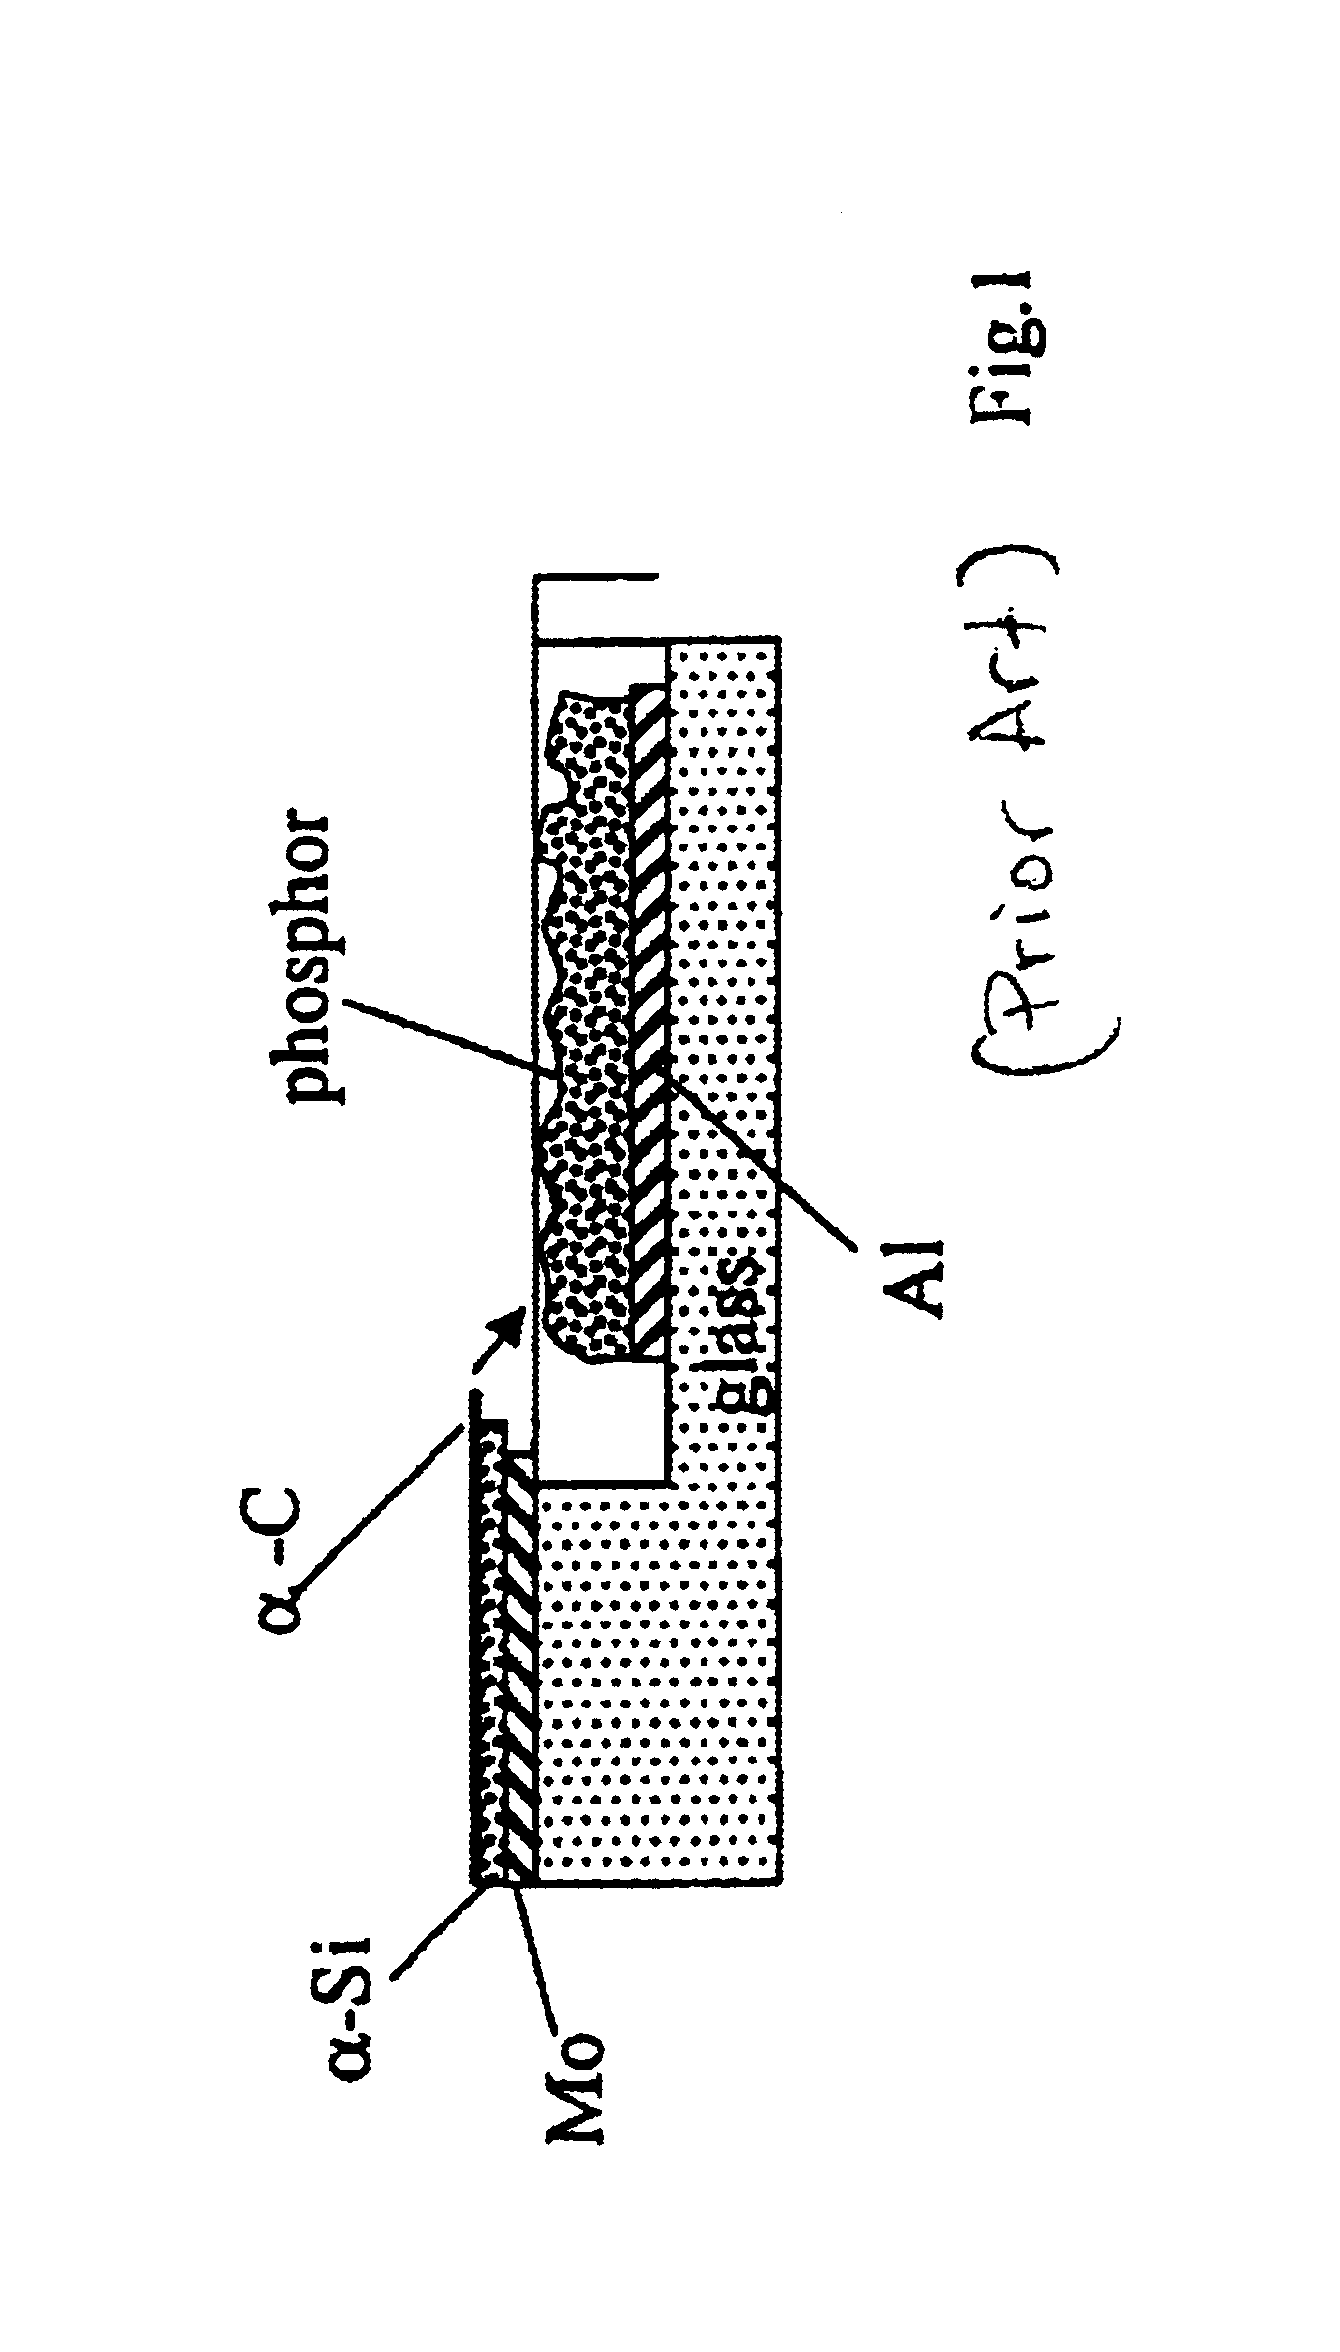 Carbon-metal nano-composite materials for field emission cathodes and devices